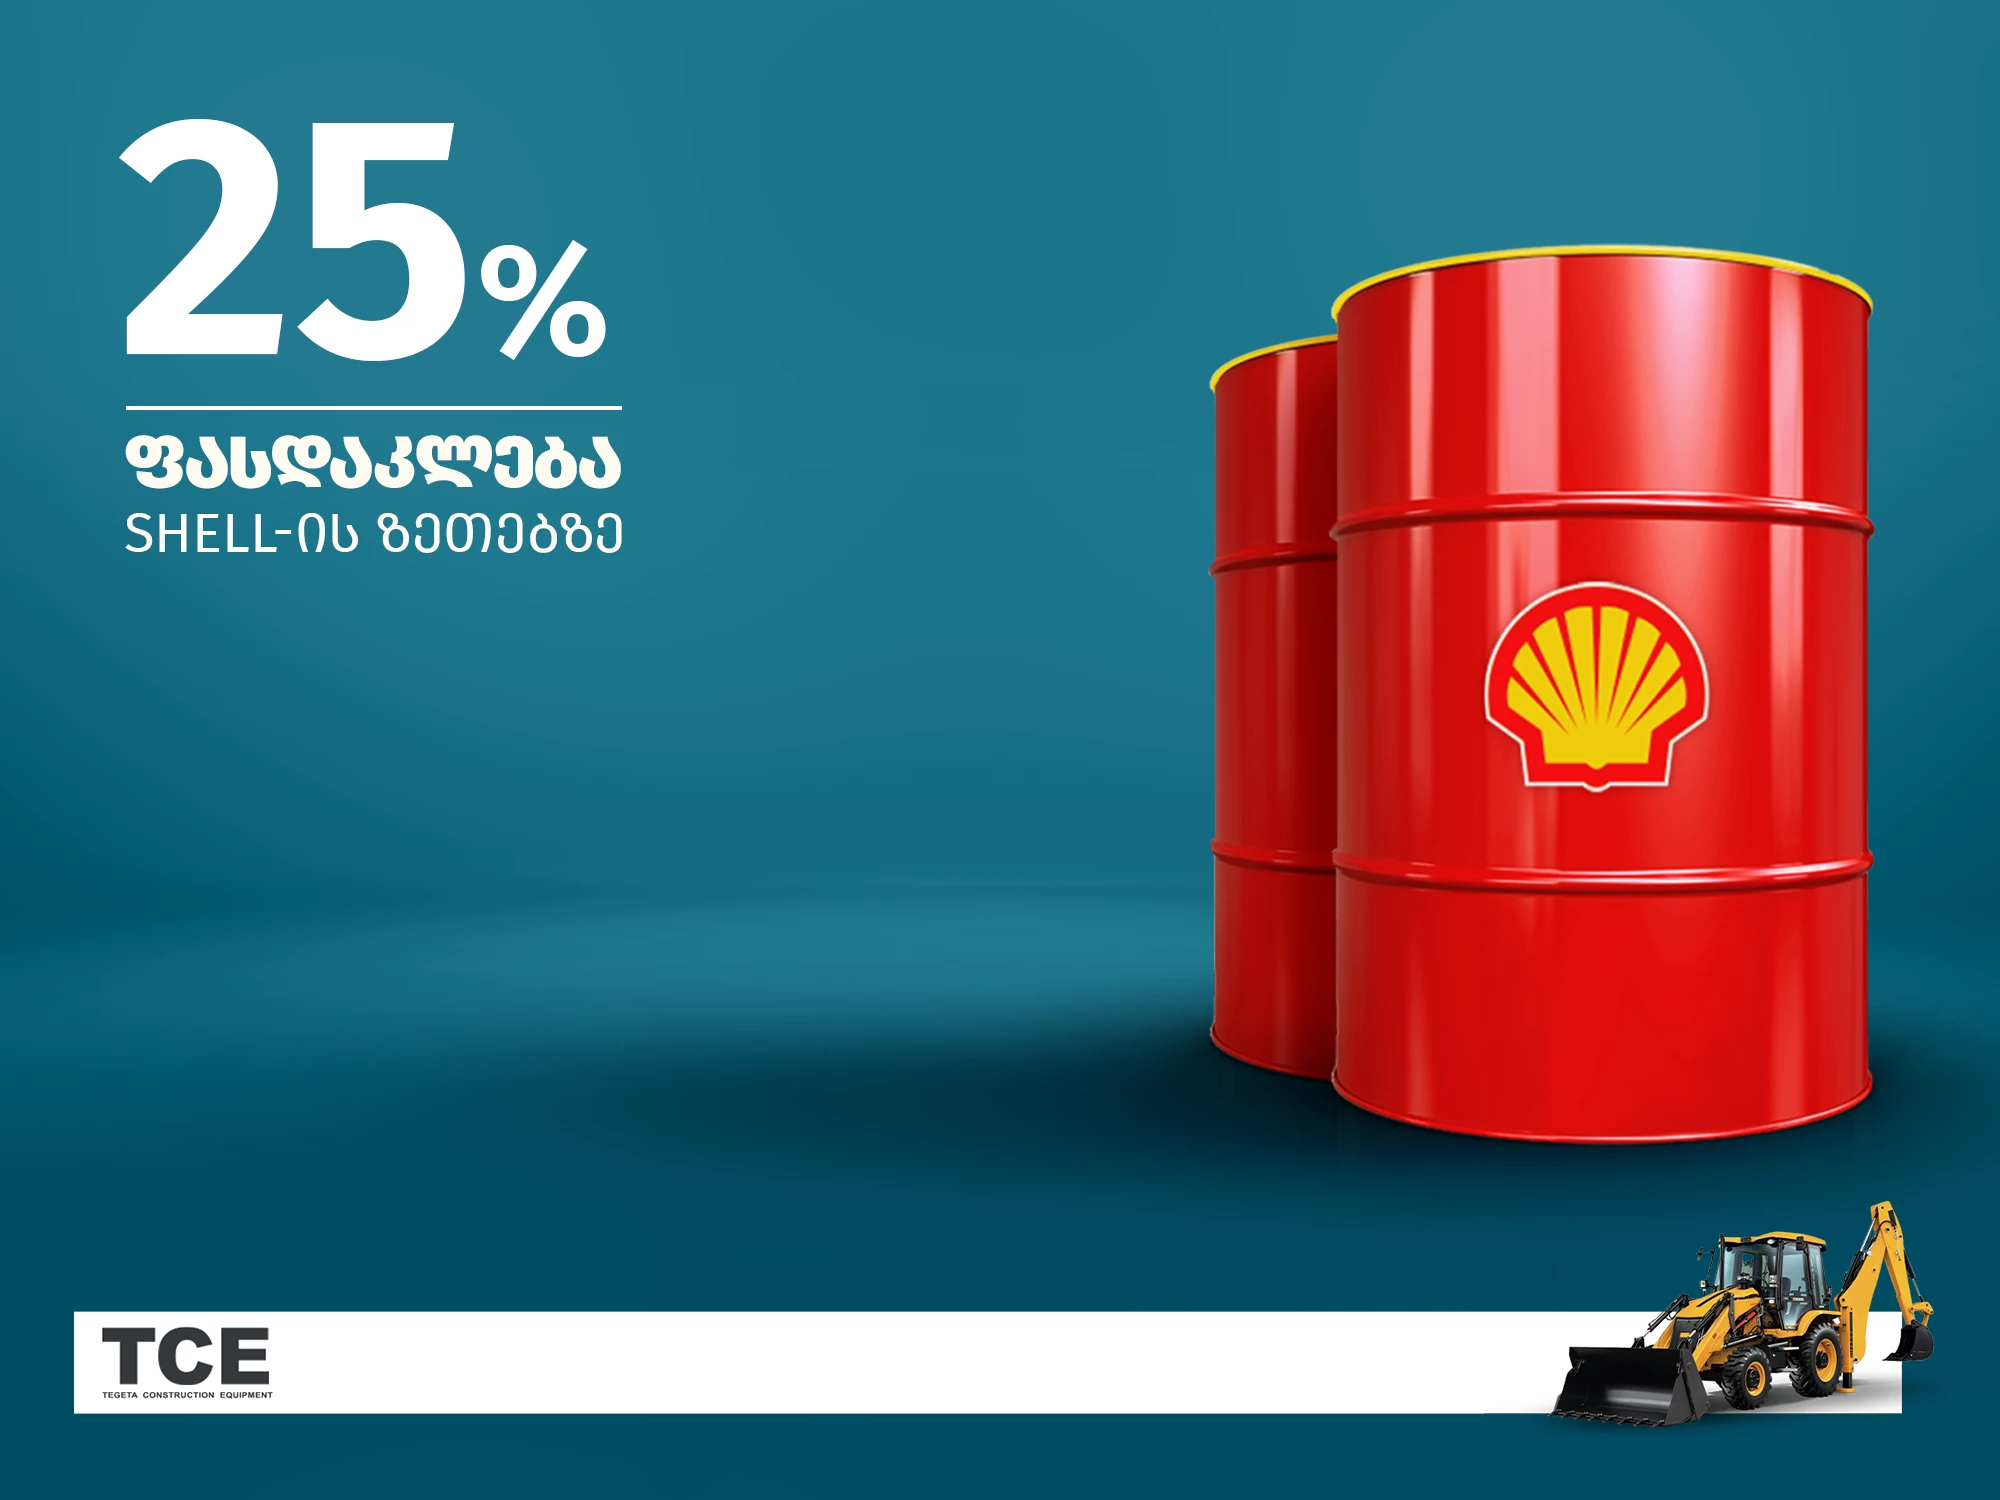 Save 25 % on Shell's premium oils Offer Image